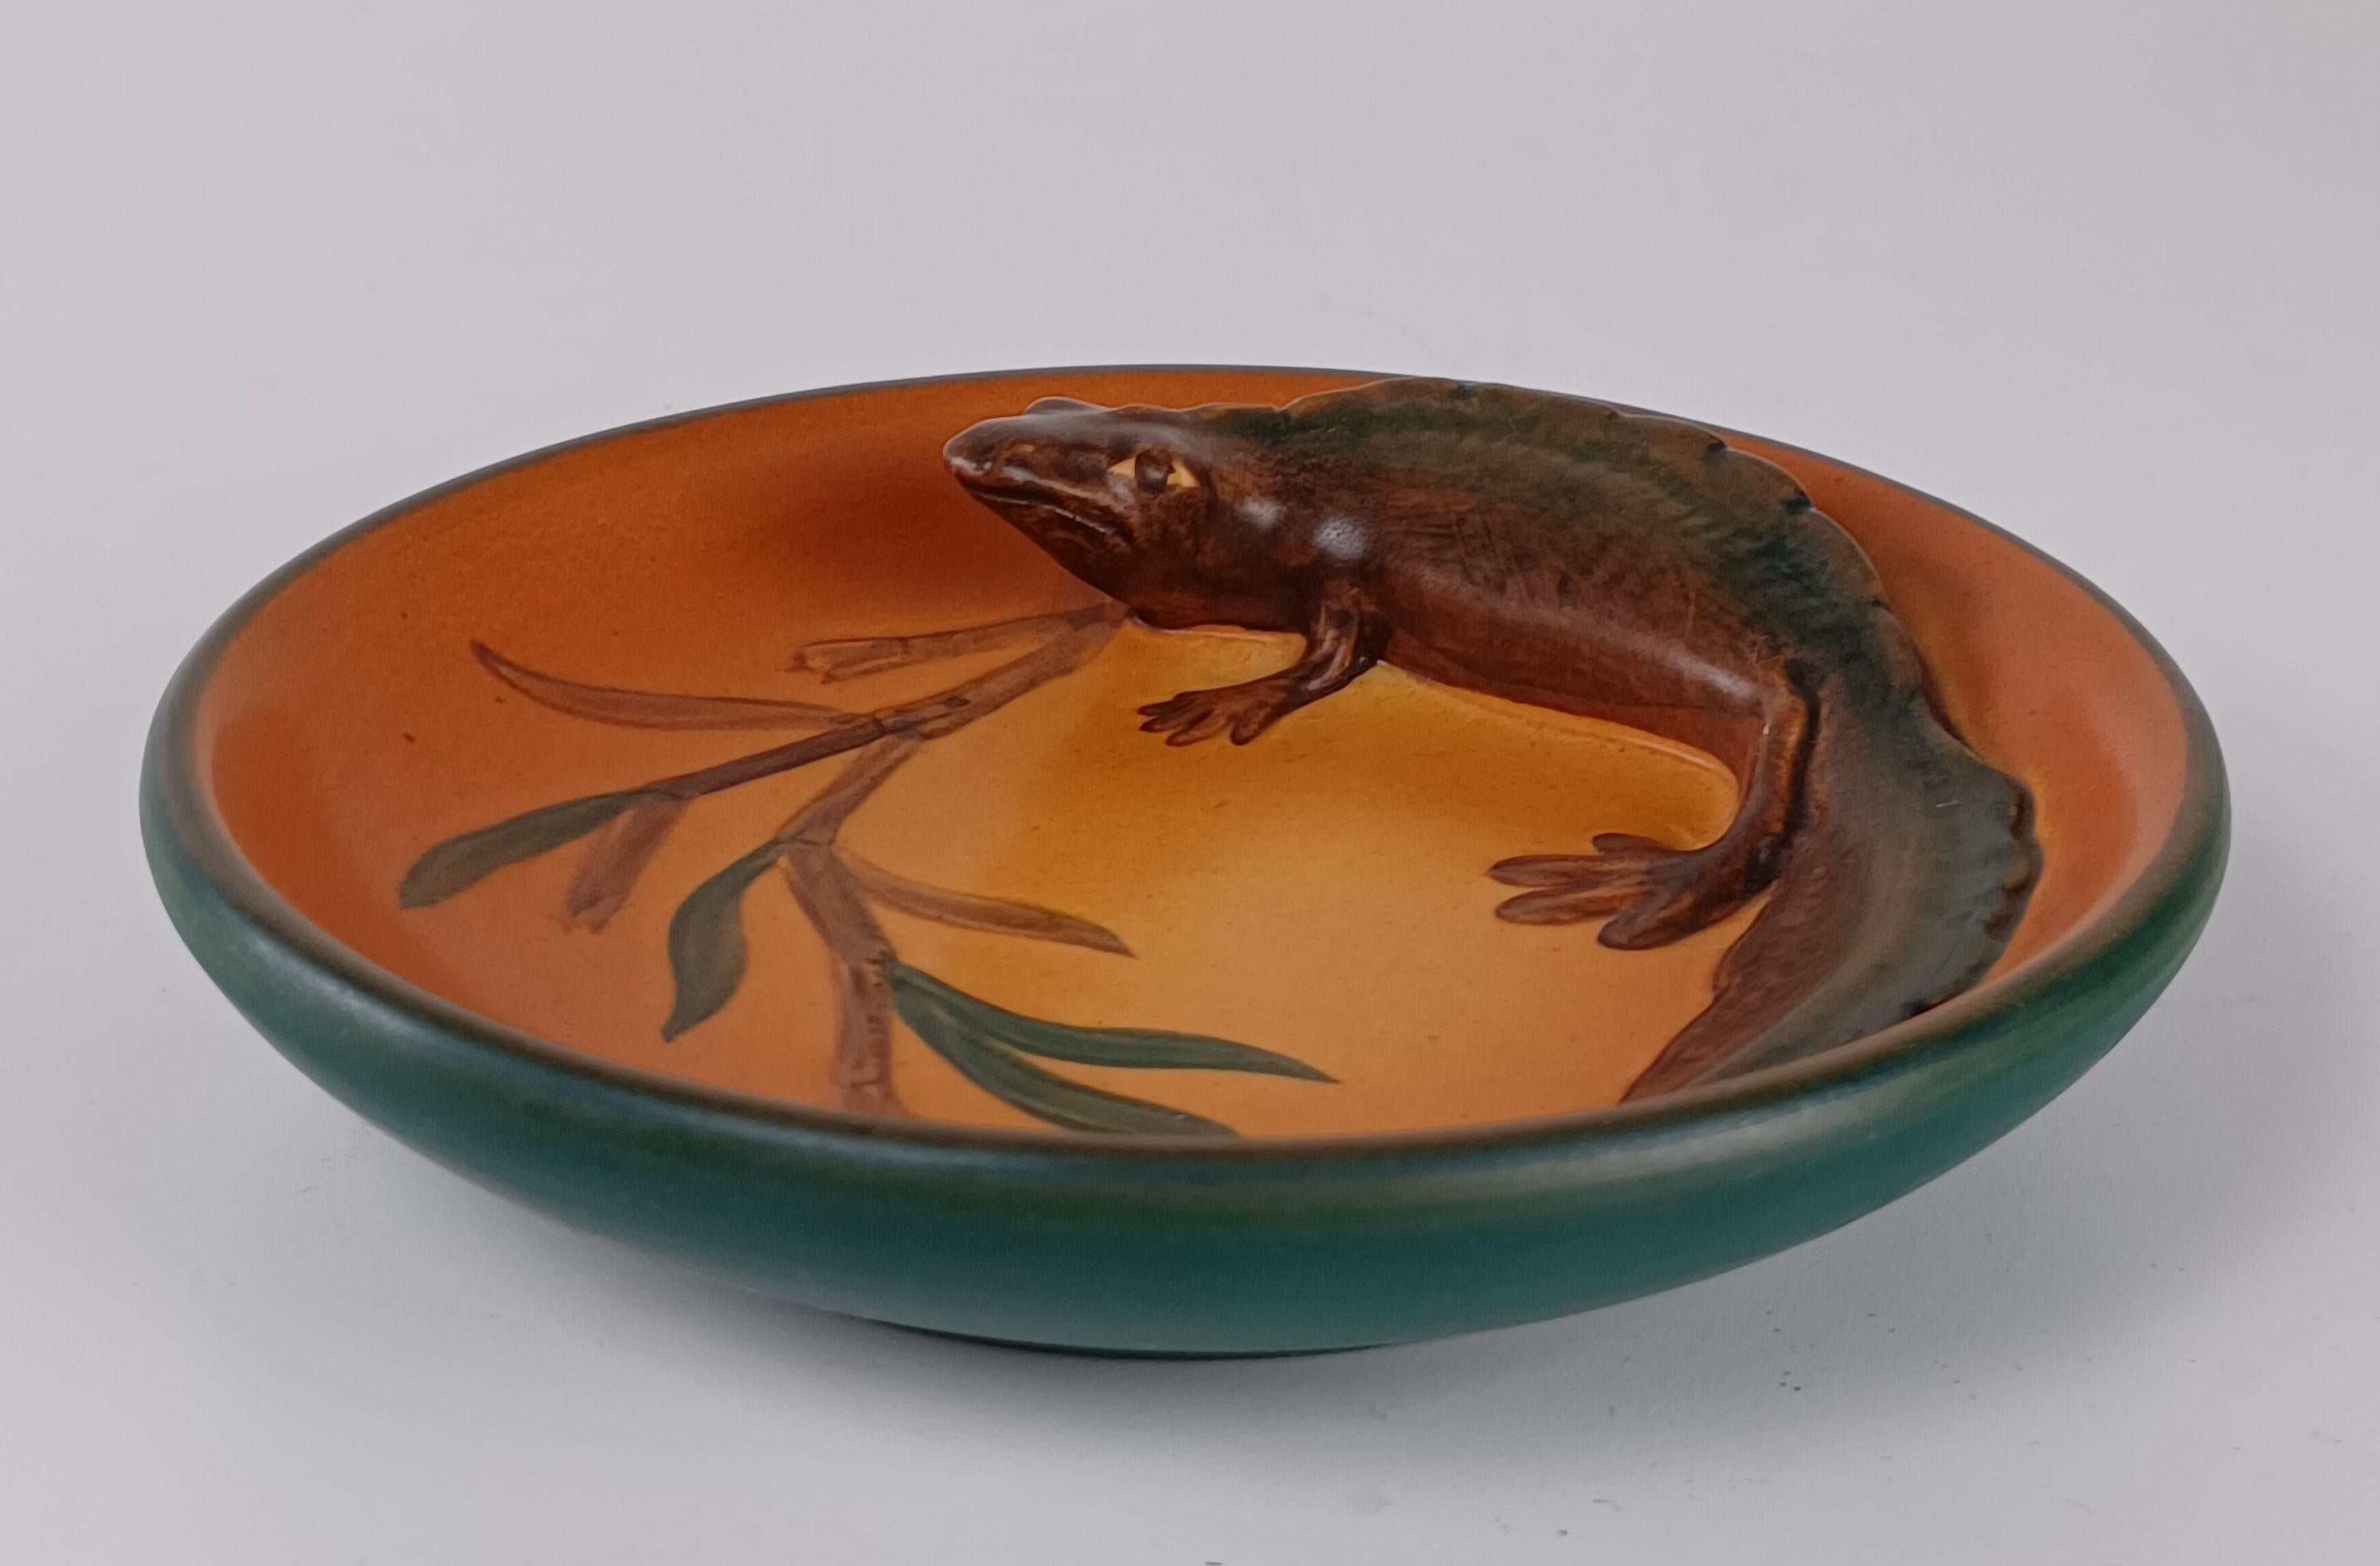 1920's Danish Art Nouveau Handcrafted Fish and Salamander Bowls by P. Ipsens Enke

The handcrafted art nuveau bowls were created featuring a salamander and two fish were designed in 1929 by Axel Sørensen as ash tray and cigarette bowls are is in